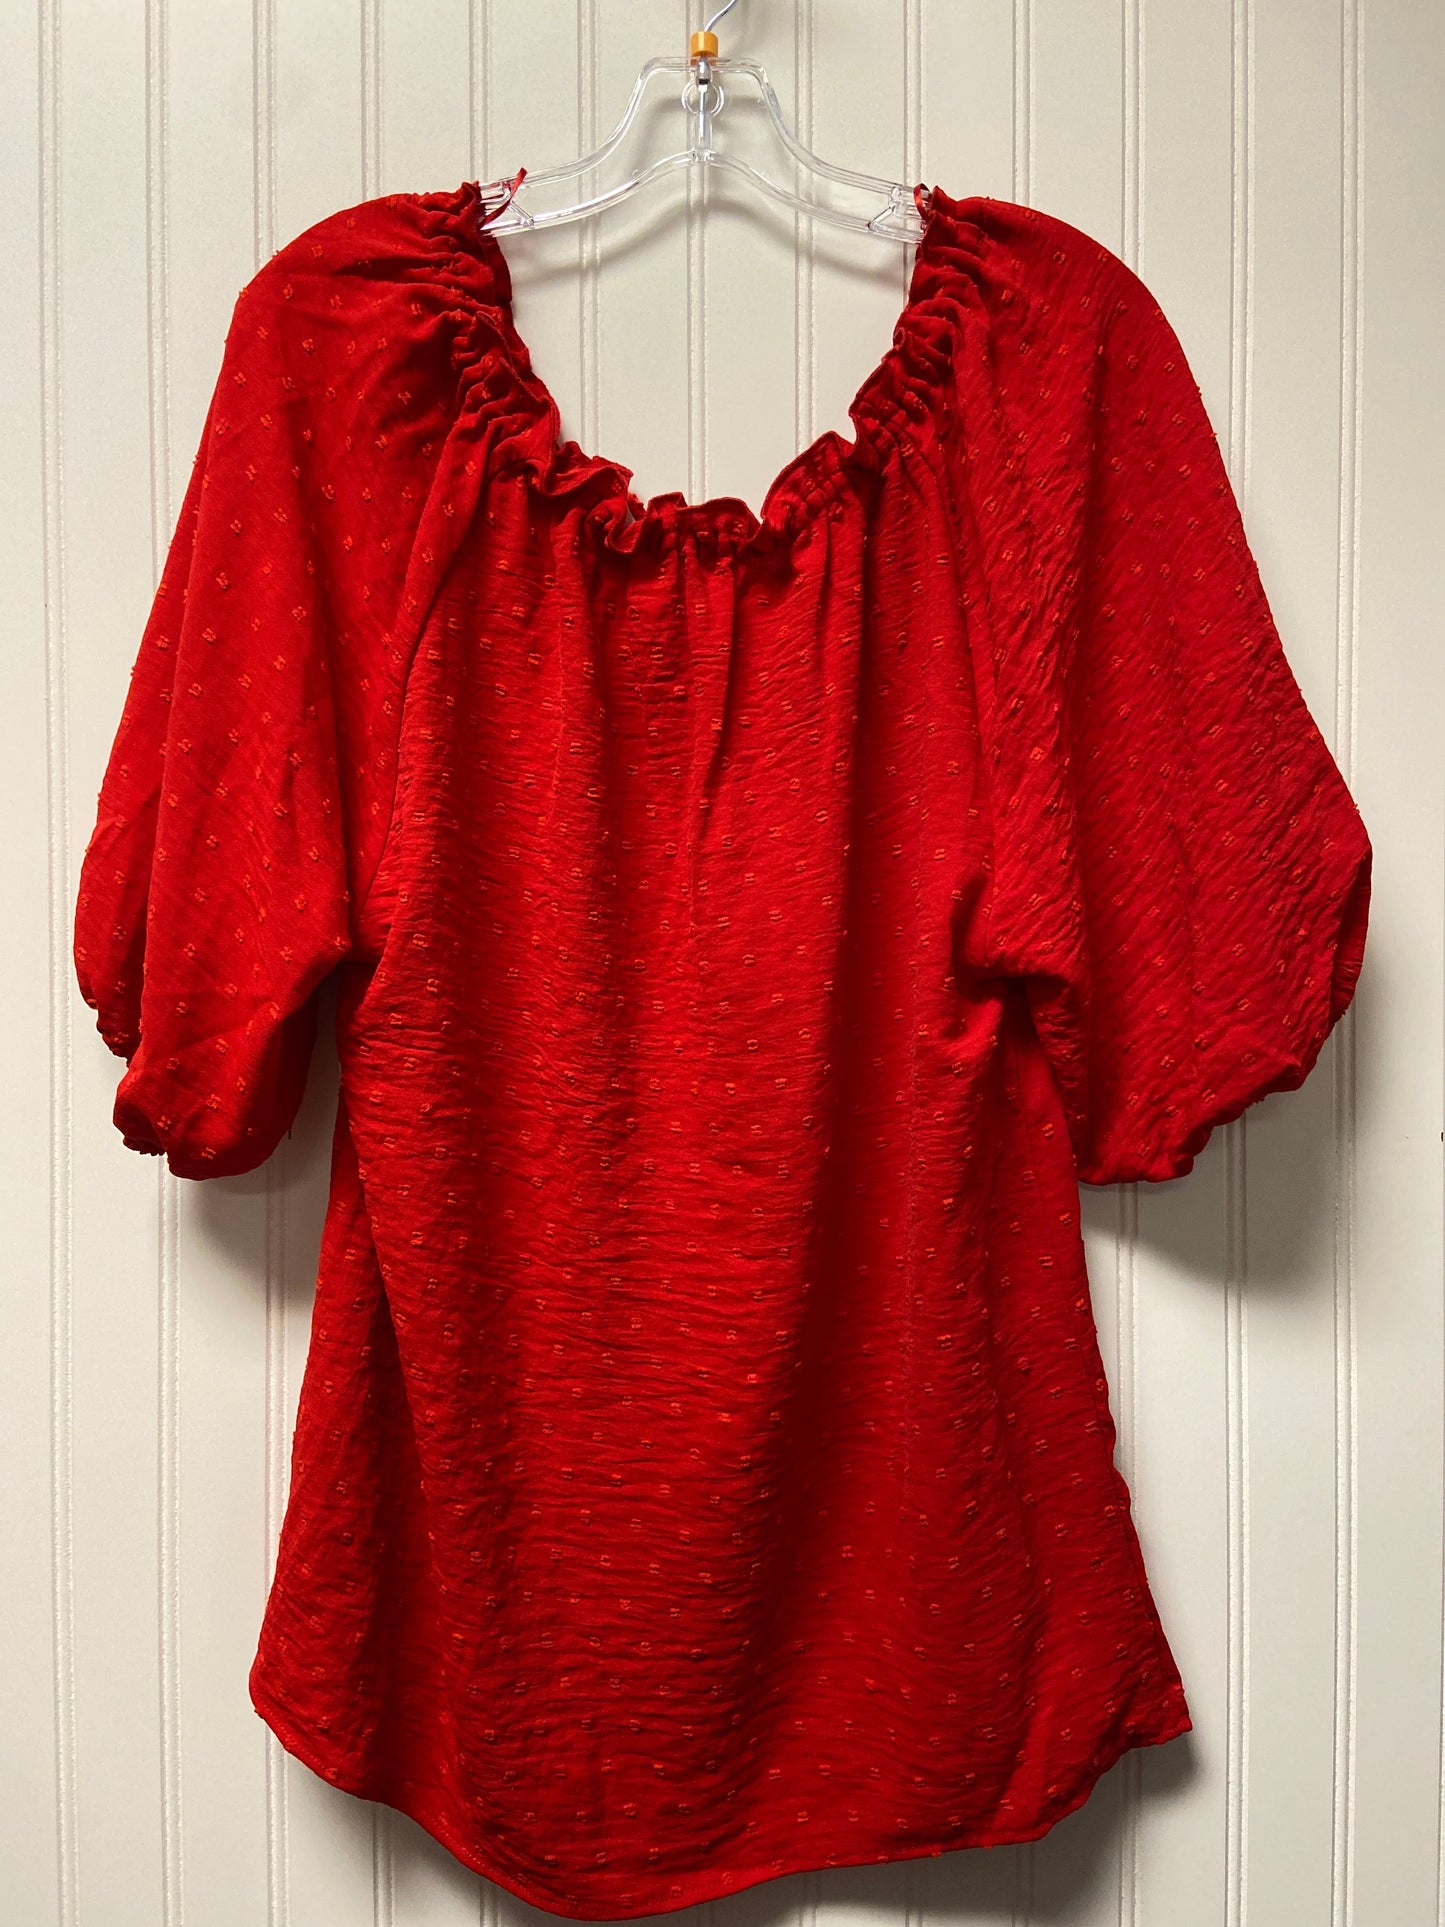 Red Top Short Sleeve 89th And Madison, Size M